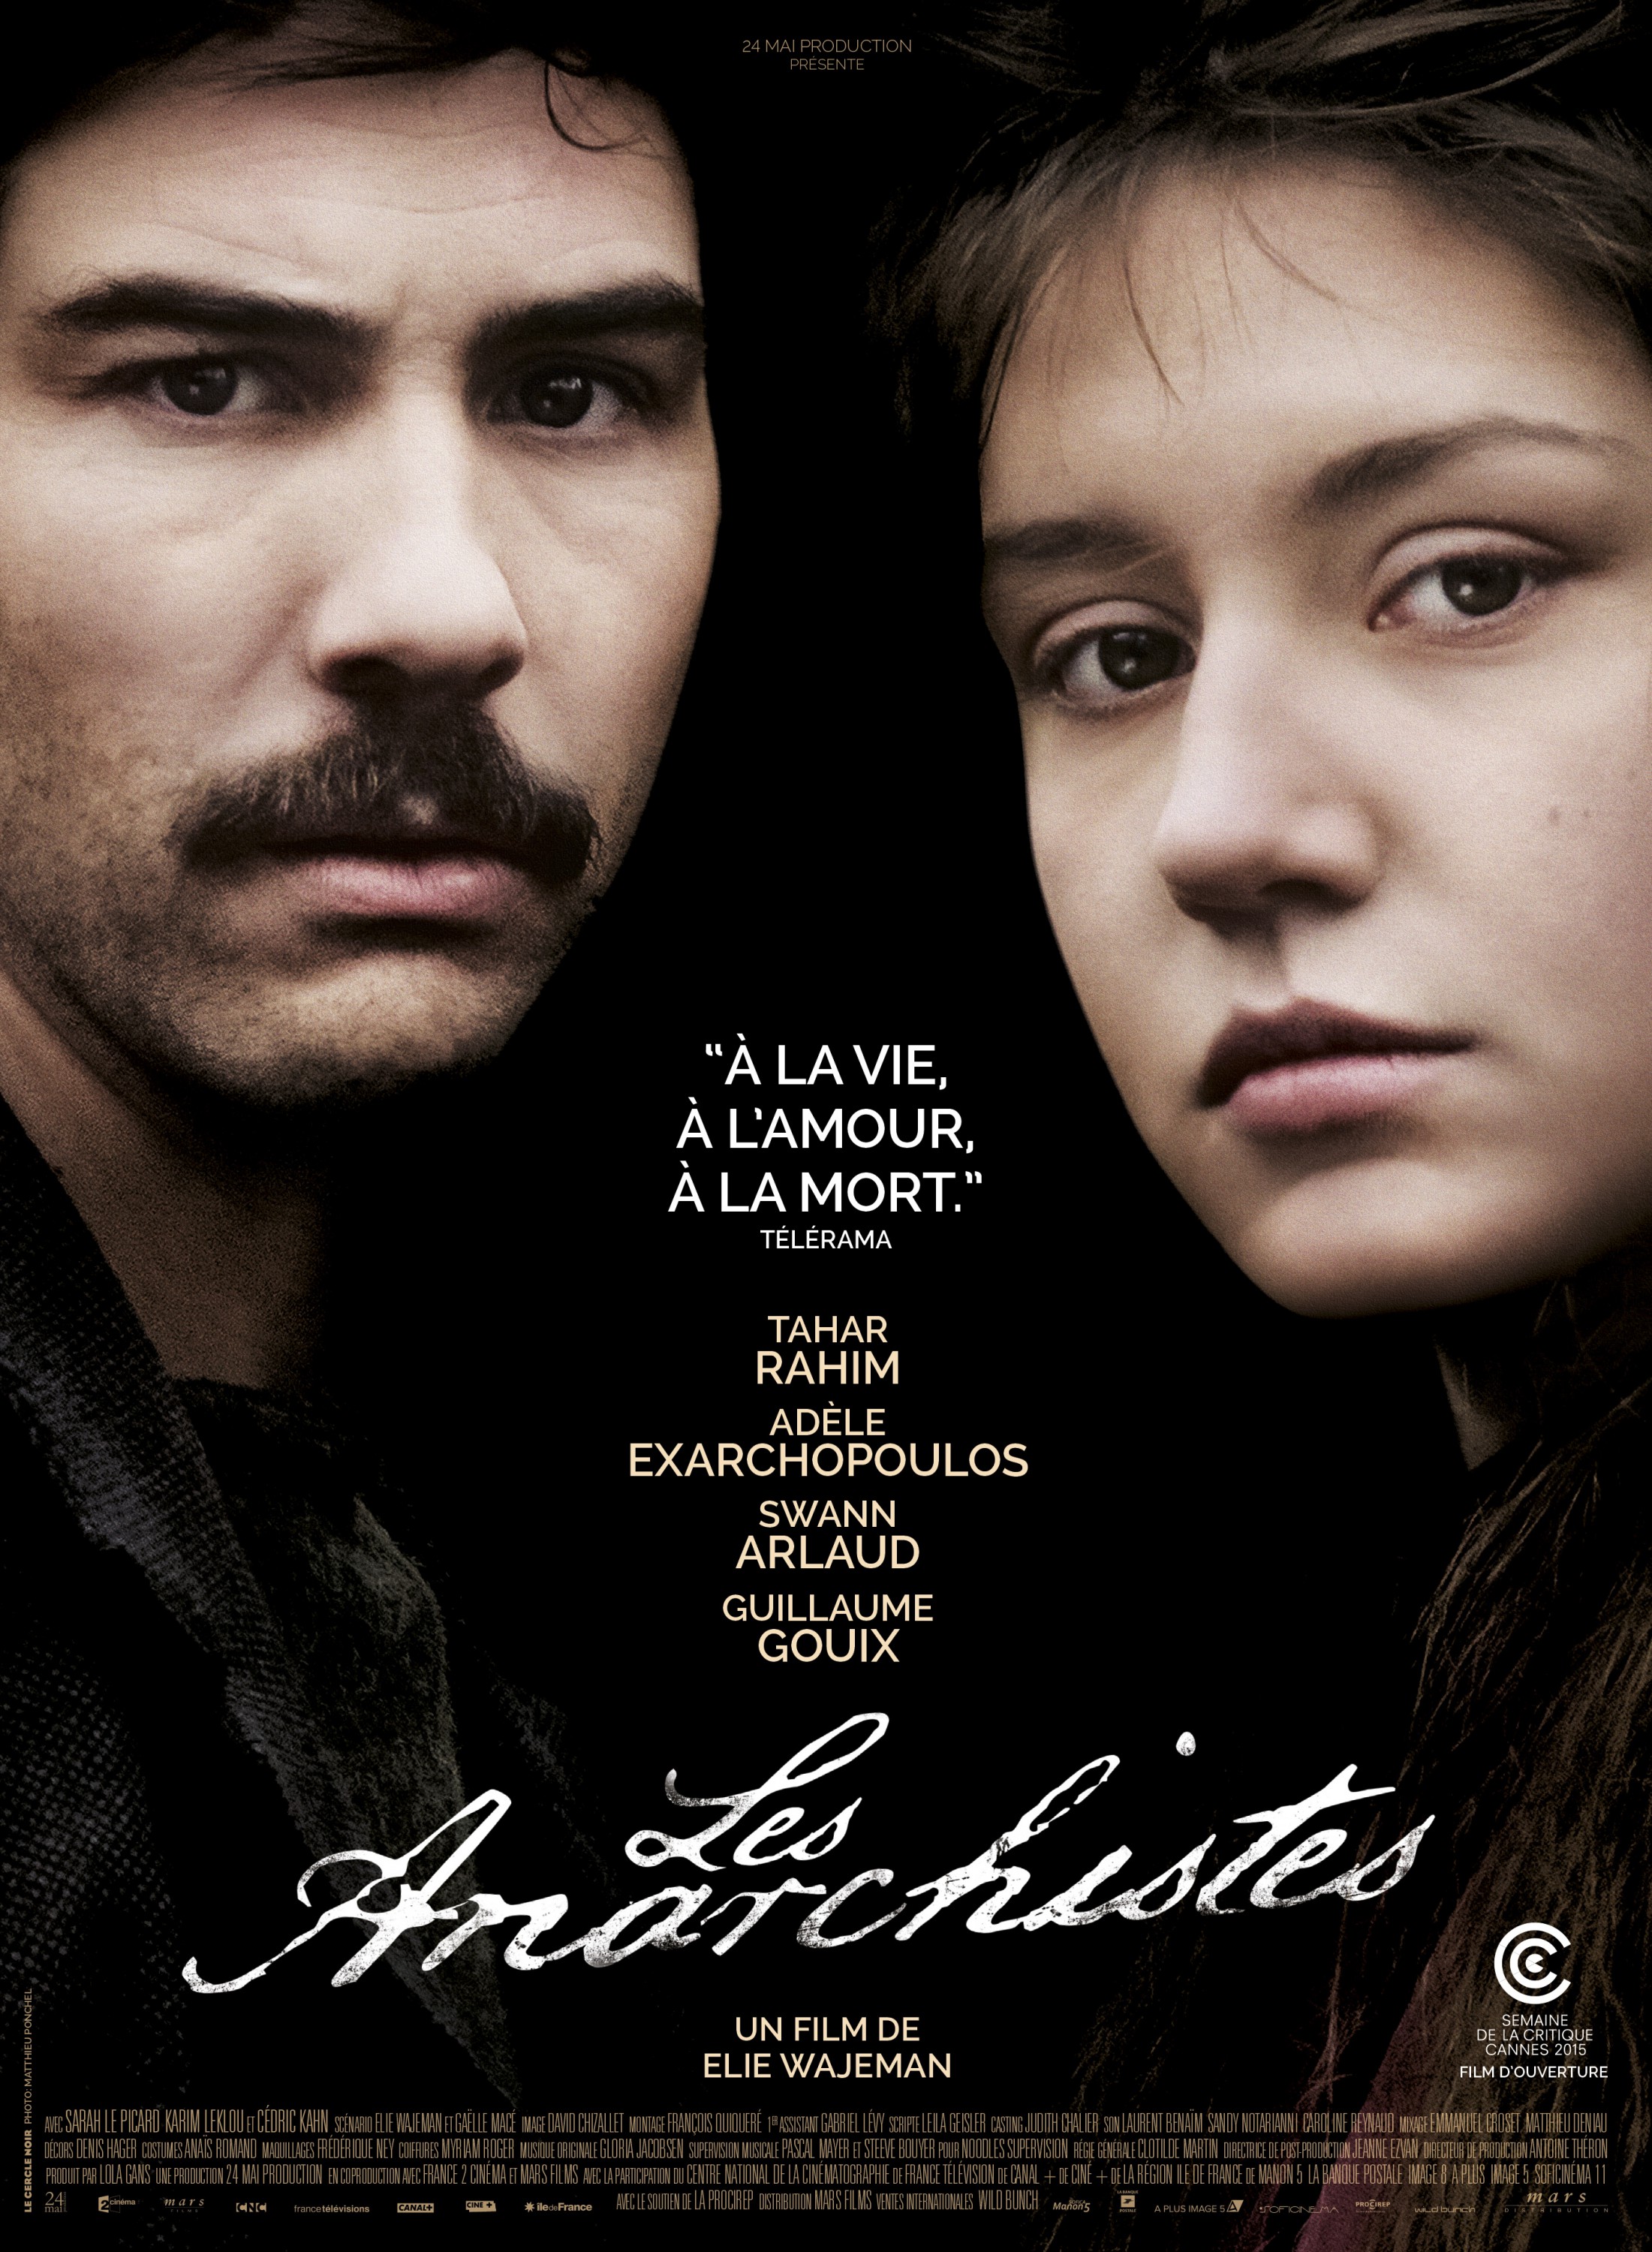 Mega Sized Movie Poster Image for Les anarchistes (#7 of 7)